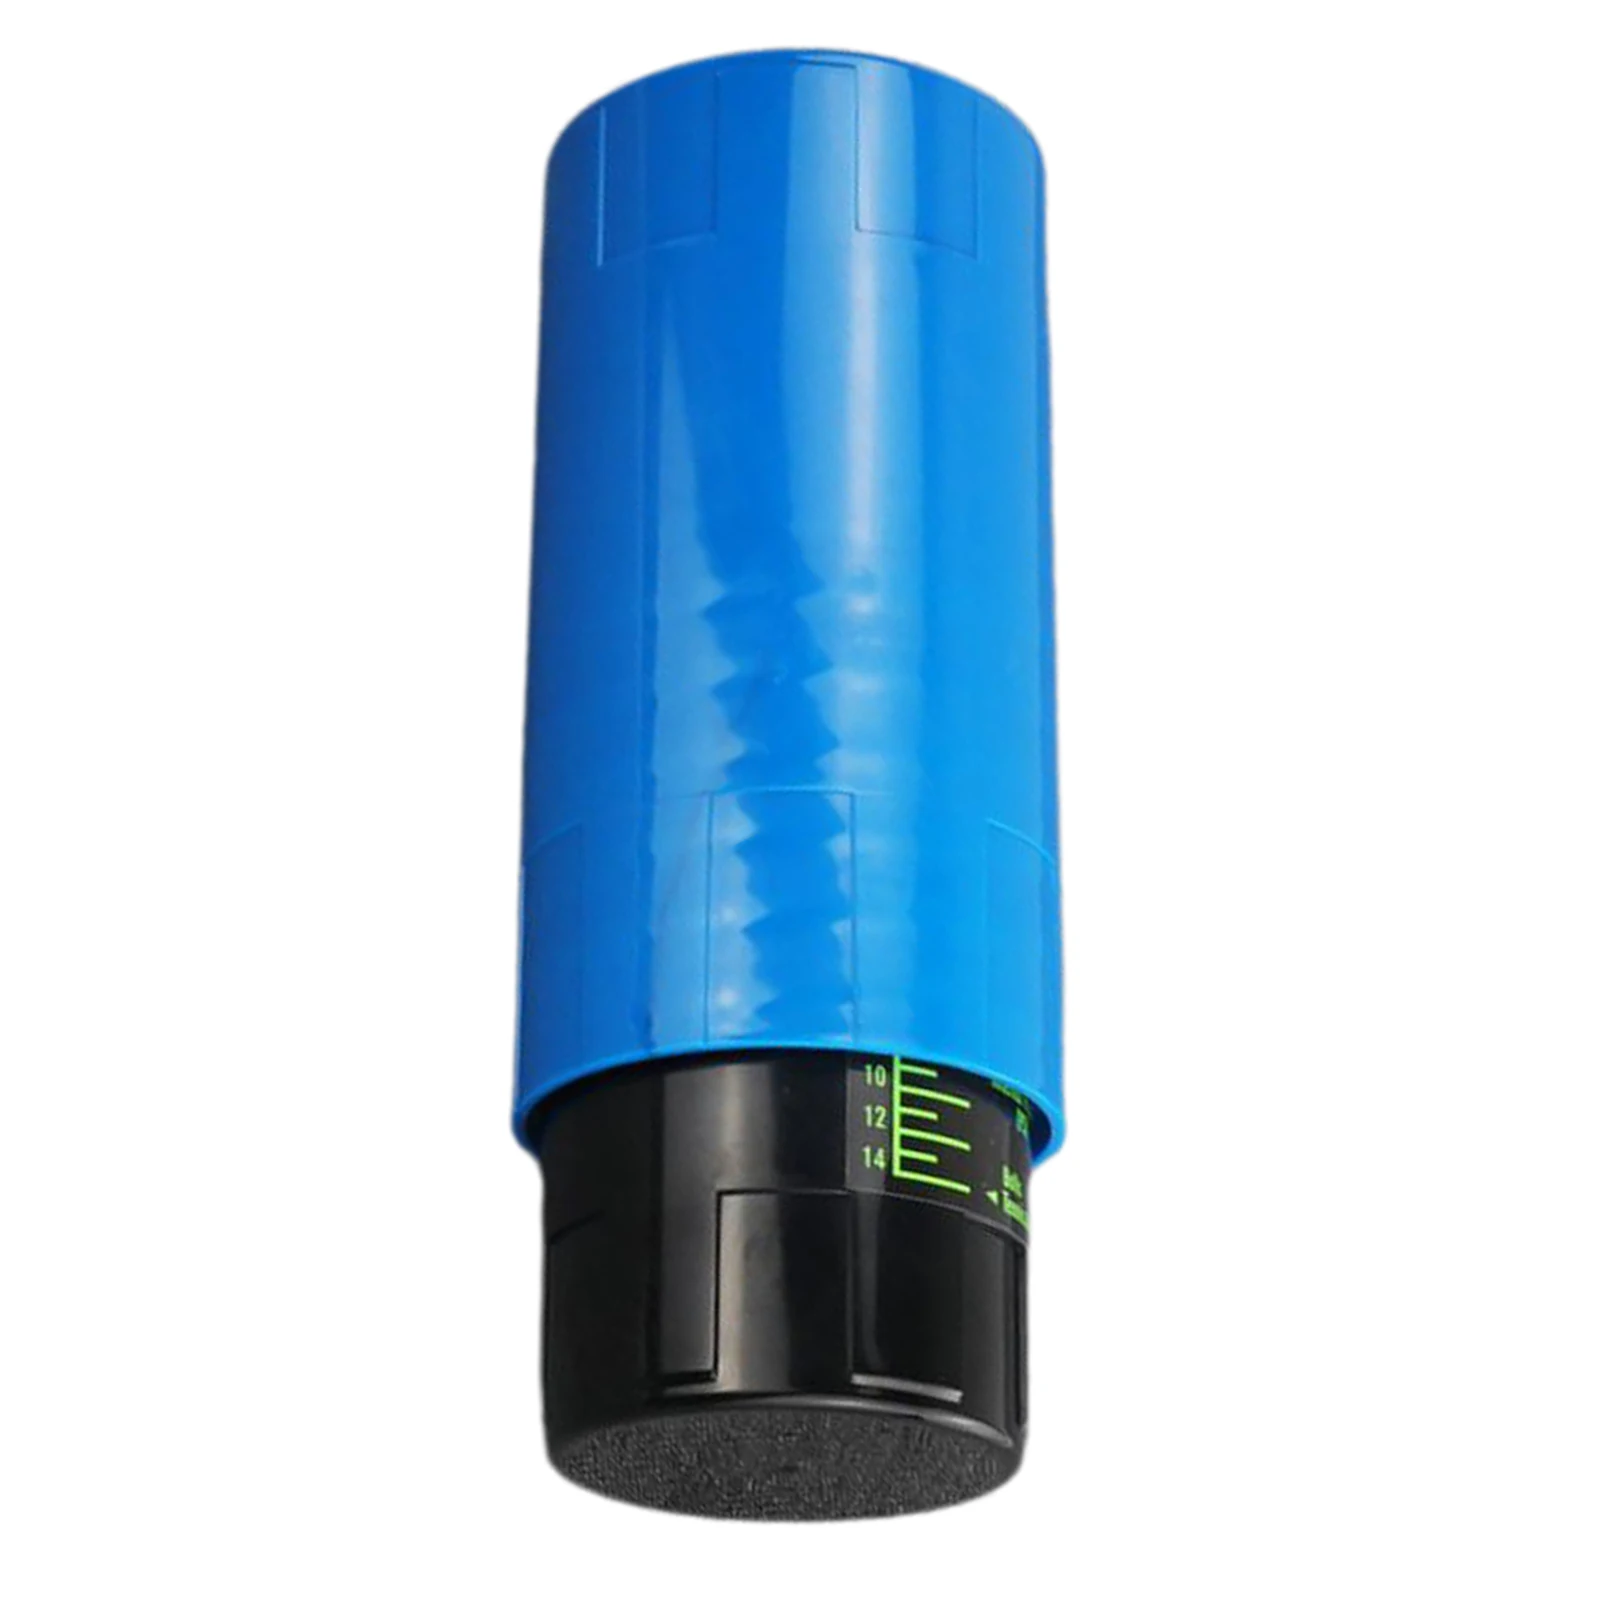 Tennis Ball Pressurizer Portable Durable Tennis Balls Protective Holder Transport Storage Containers Tube Carrier